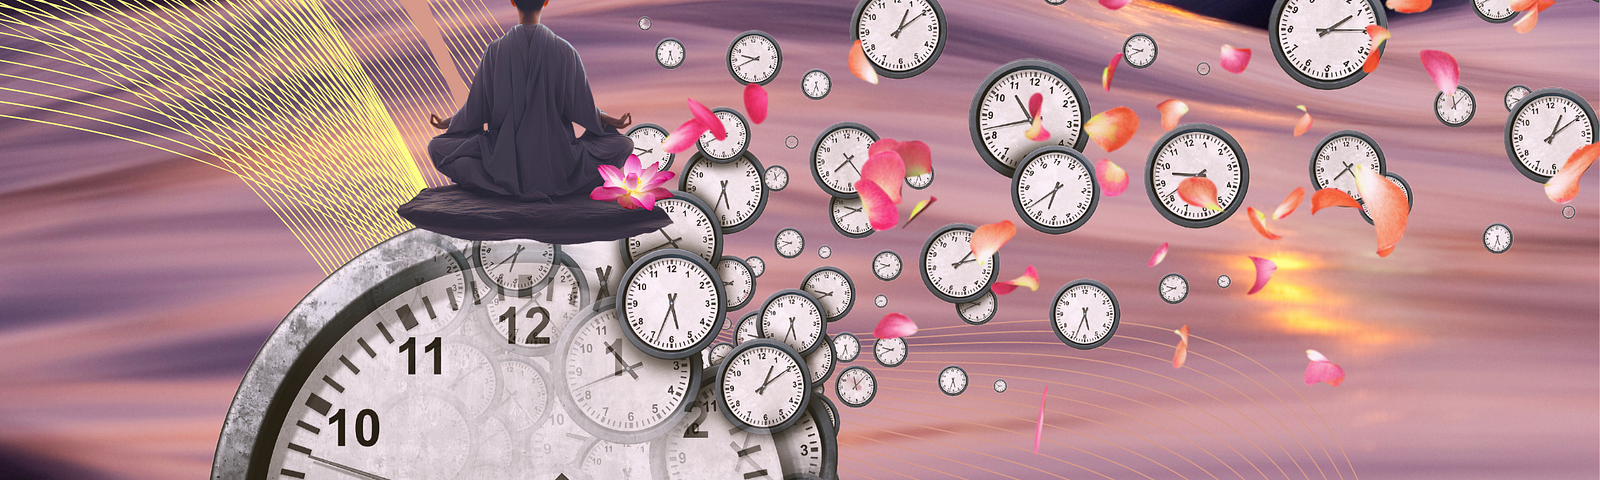 A person sits meditating on a huge clock, with tiny clocks drifting away from it like flower petals agains a background of flowing waves.